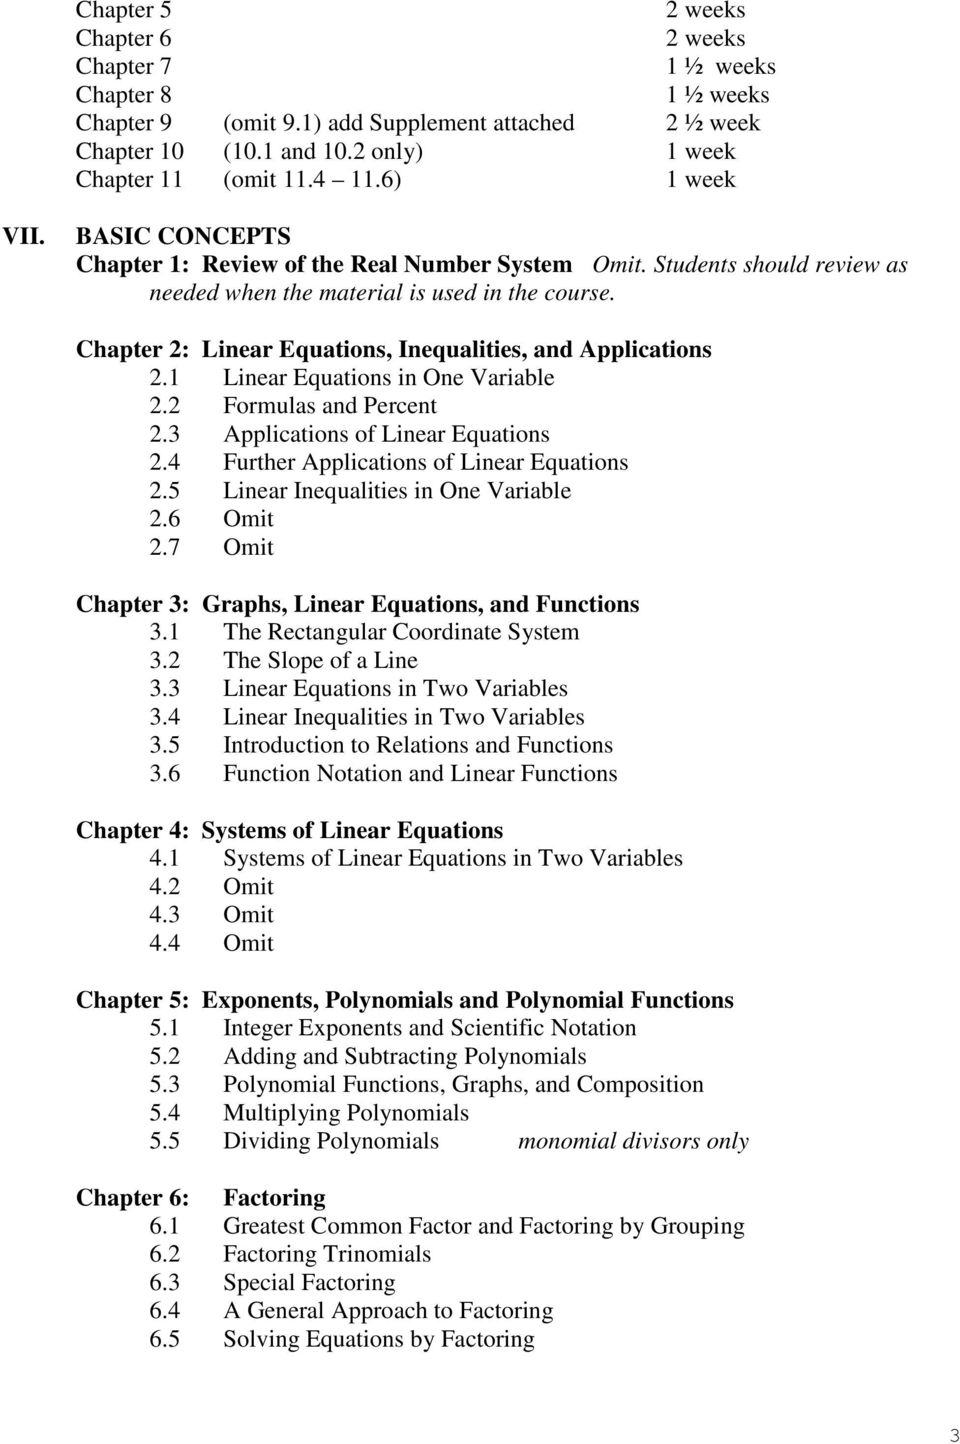 Chapter 2: Linear Equations, Inequalities, and Applications 2.1 Linear Equations in One Variable 2.2 Formulas and Percent 2.3 Applications of Linear Equations 2.